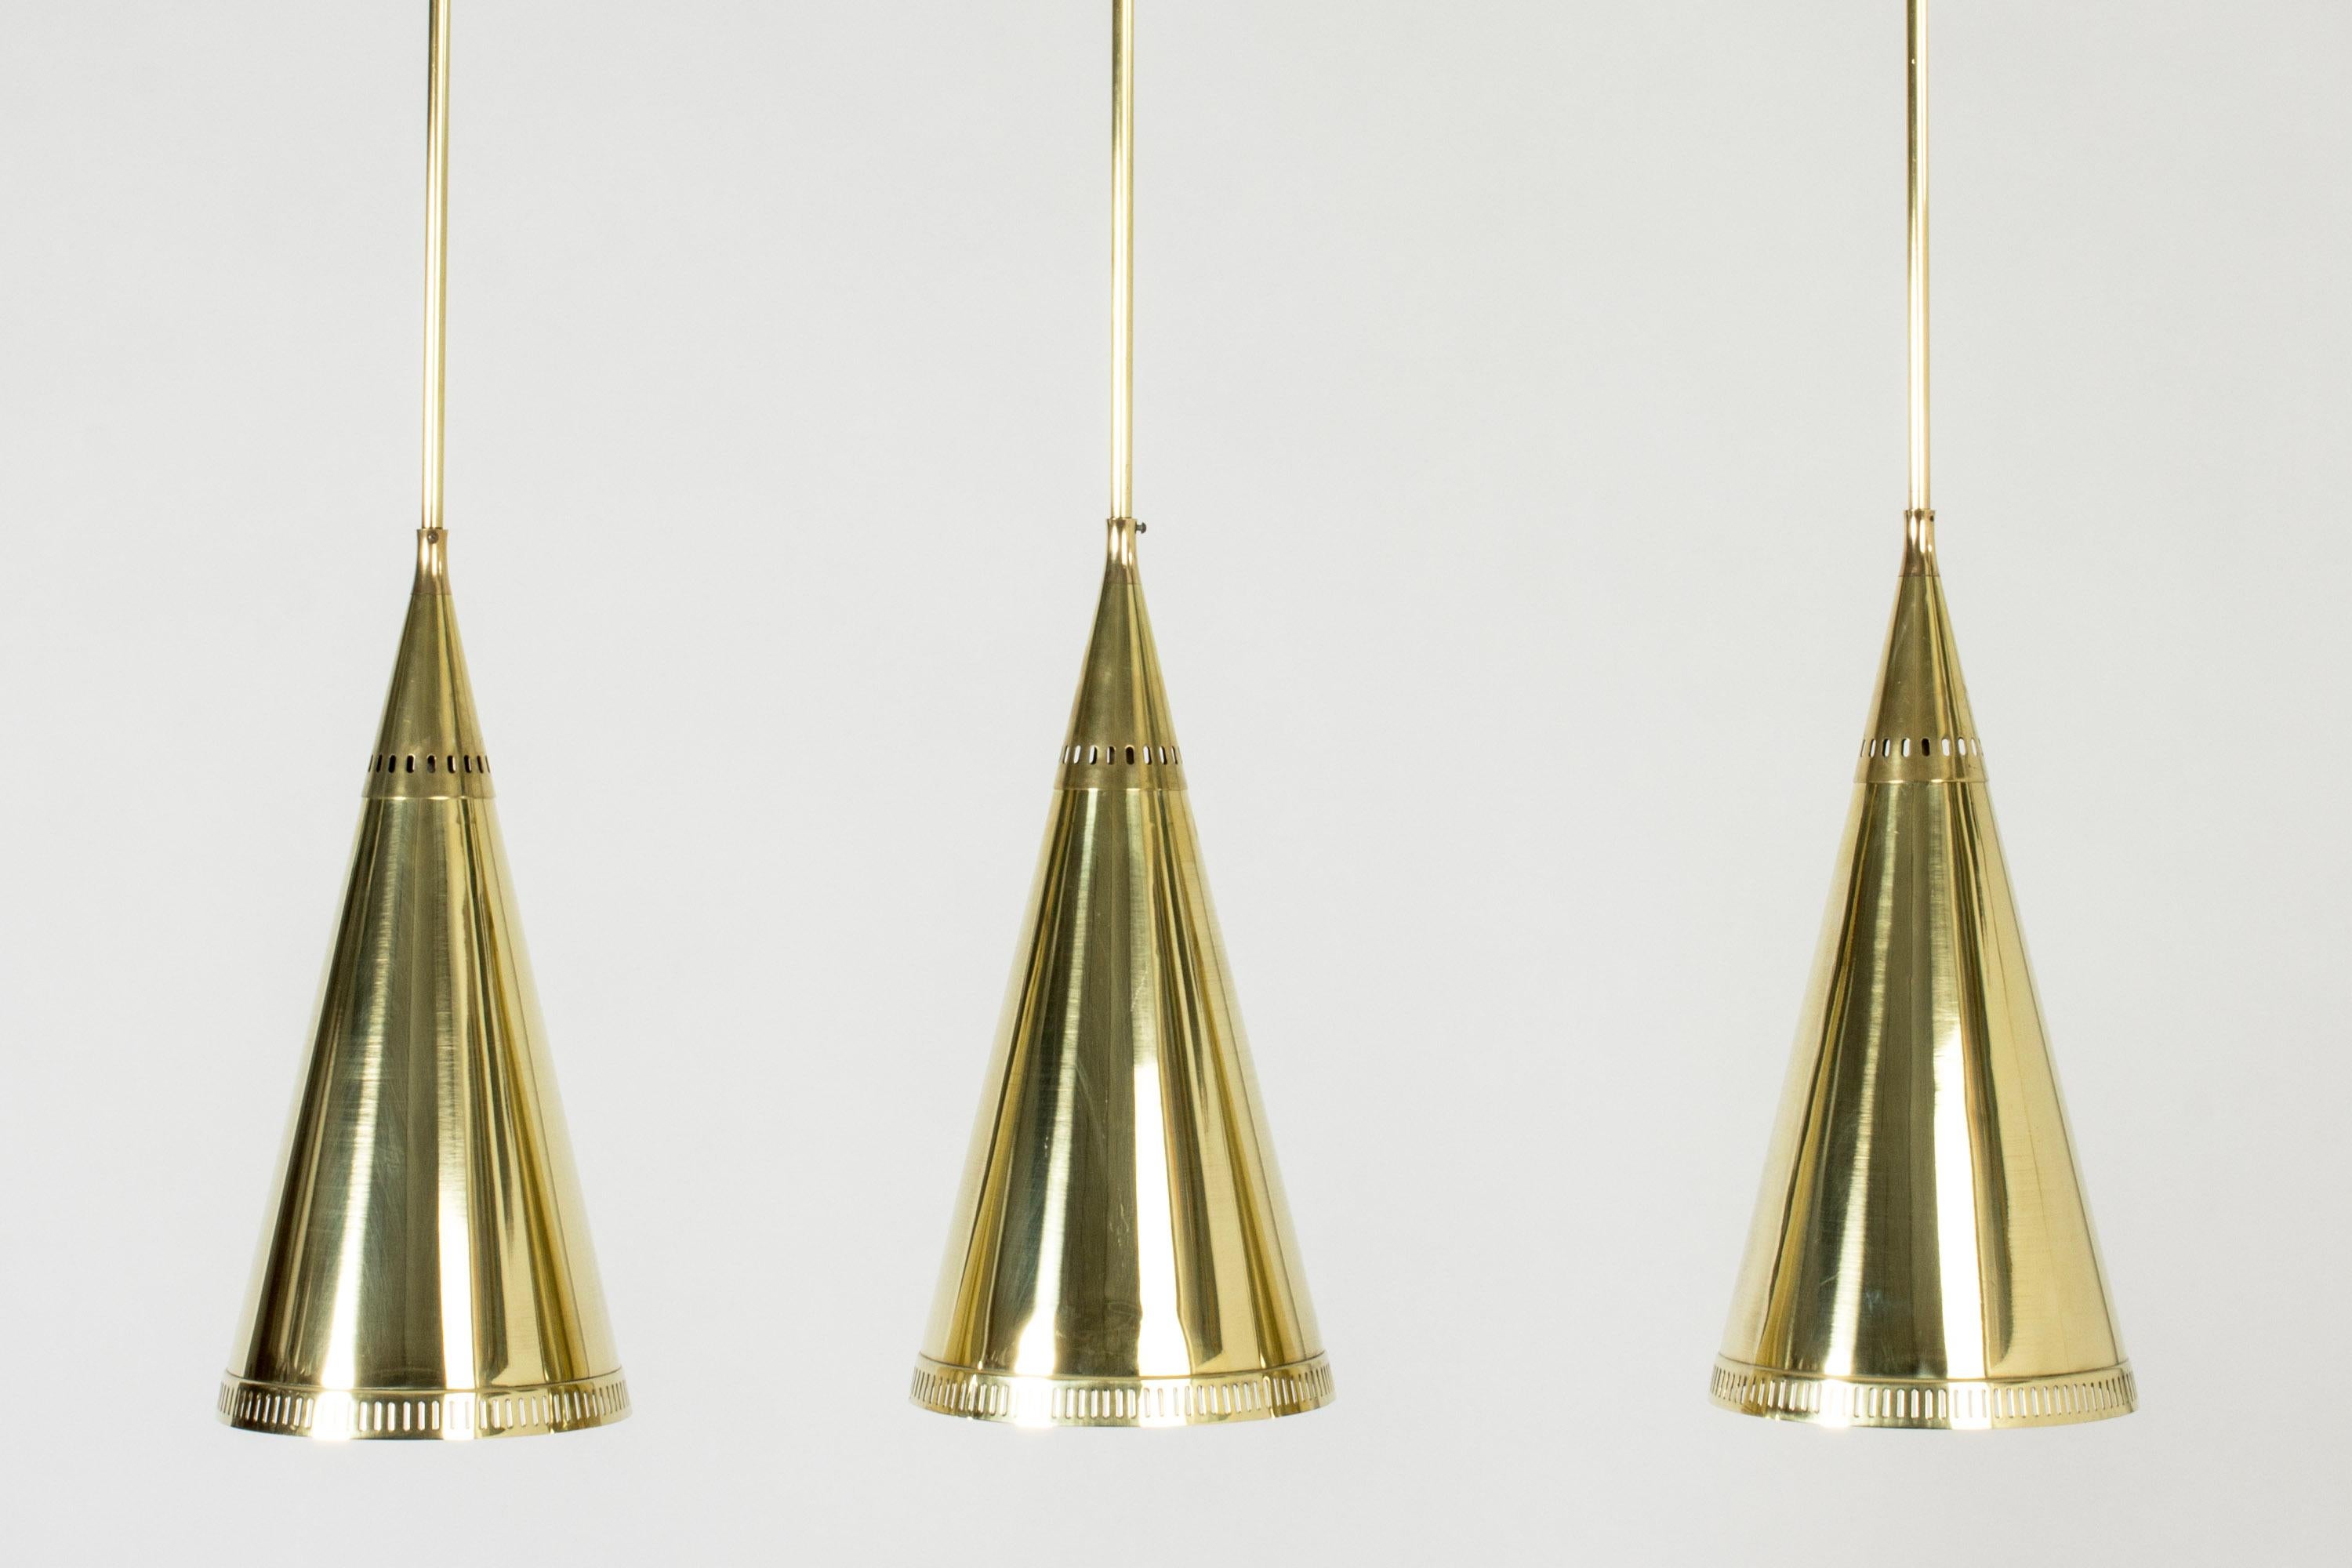 Set of three elegant brass ceiling lamps by Birger Dahl, with long brass stems. Conical shades with a perforated pattern around the rims.

The stems can be shortened.